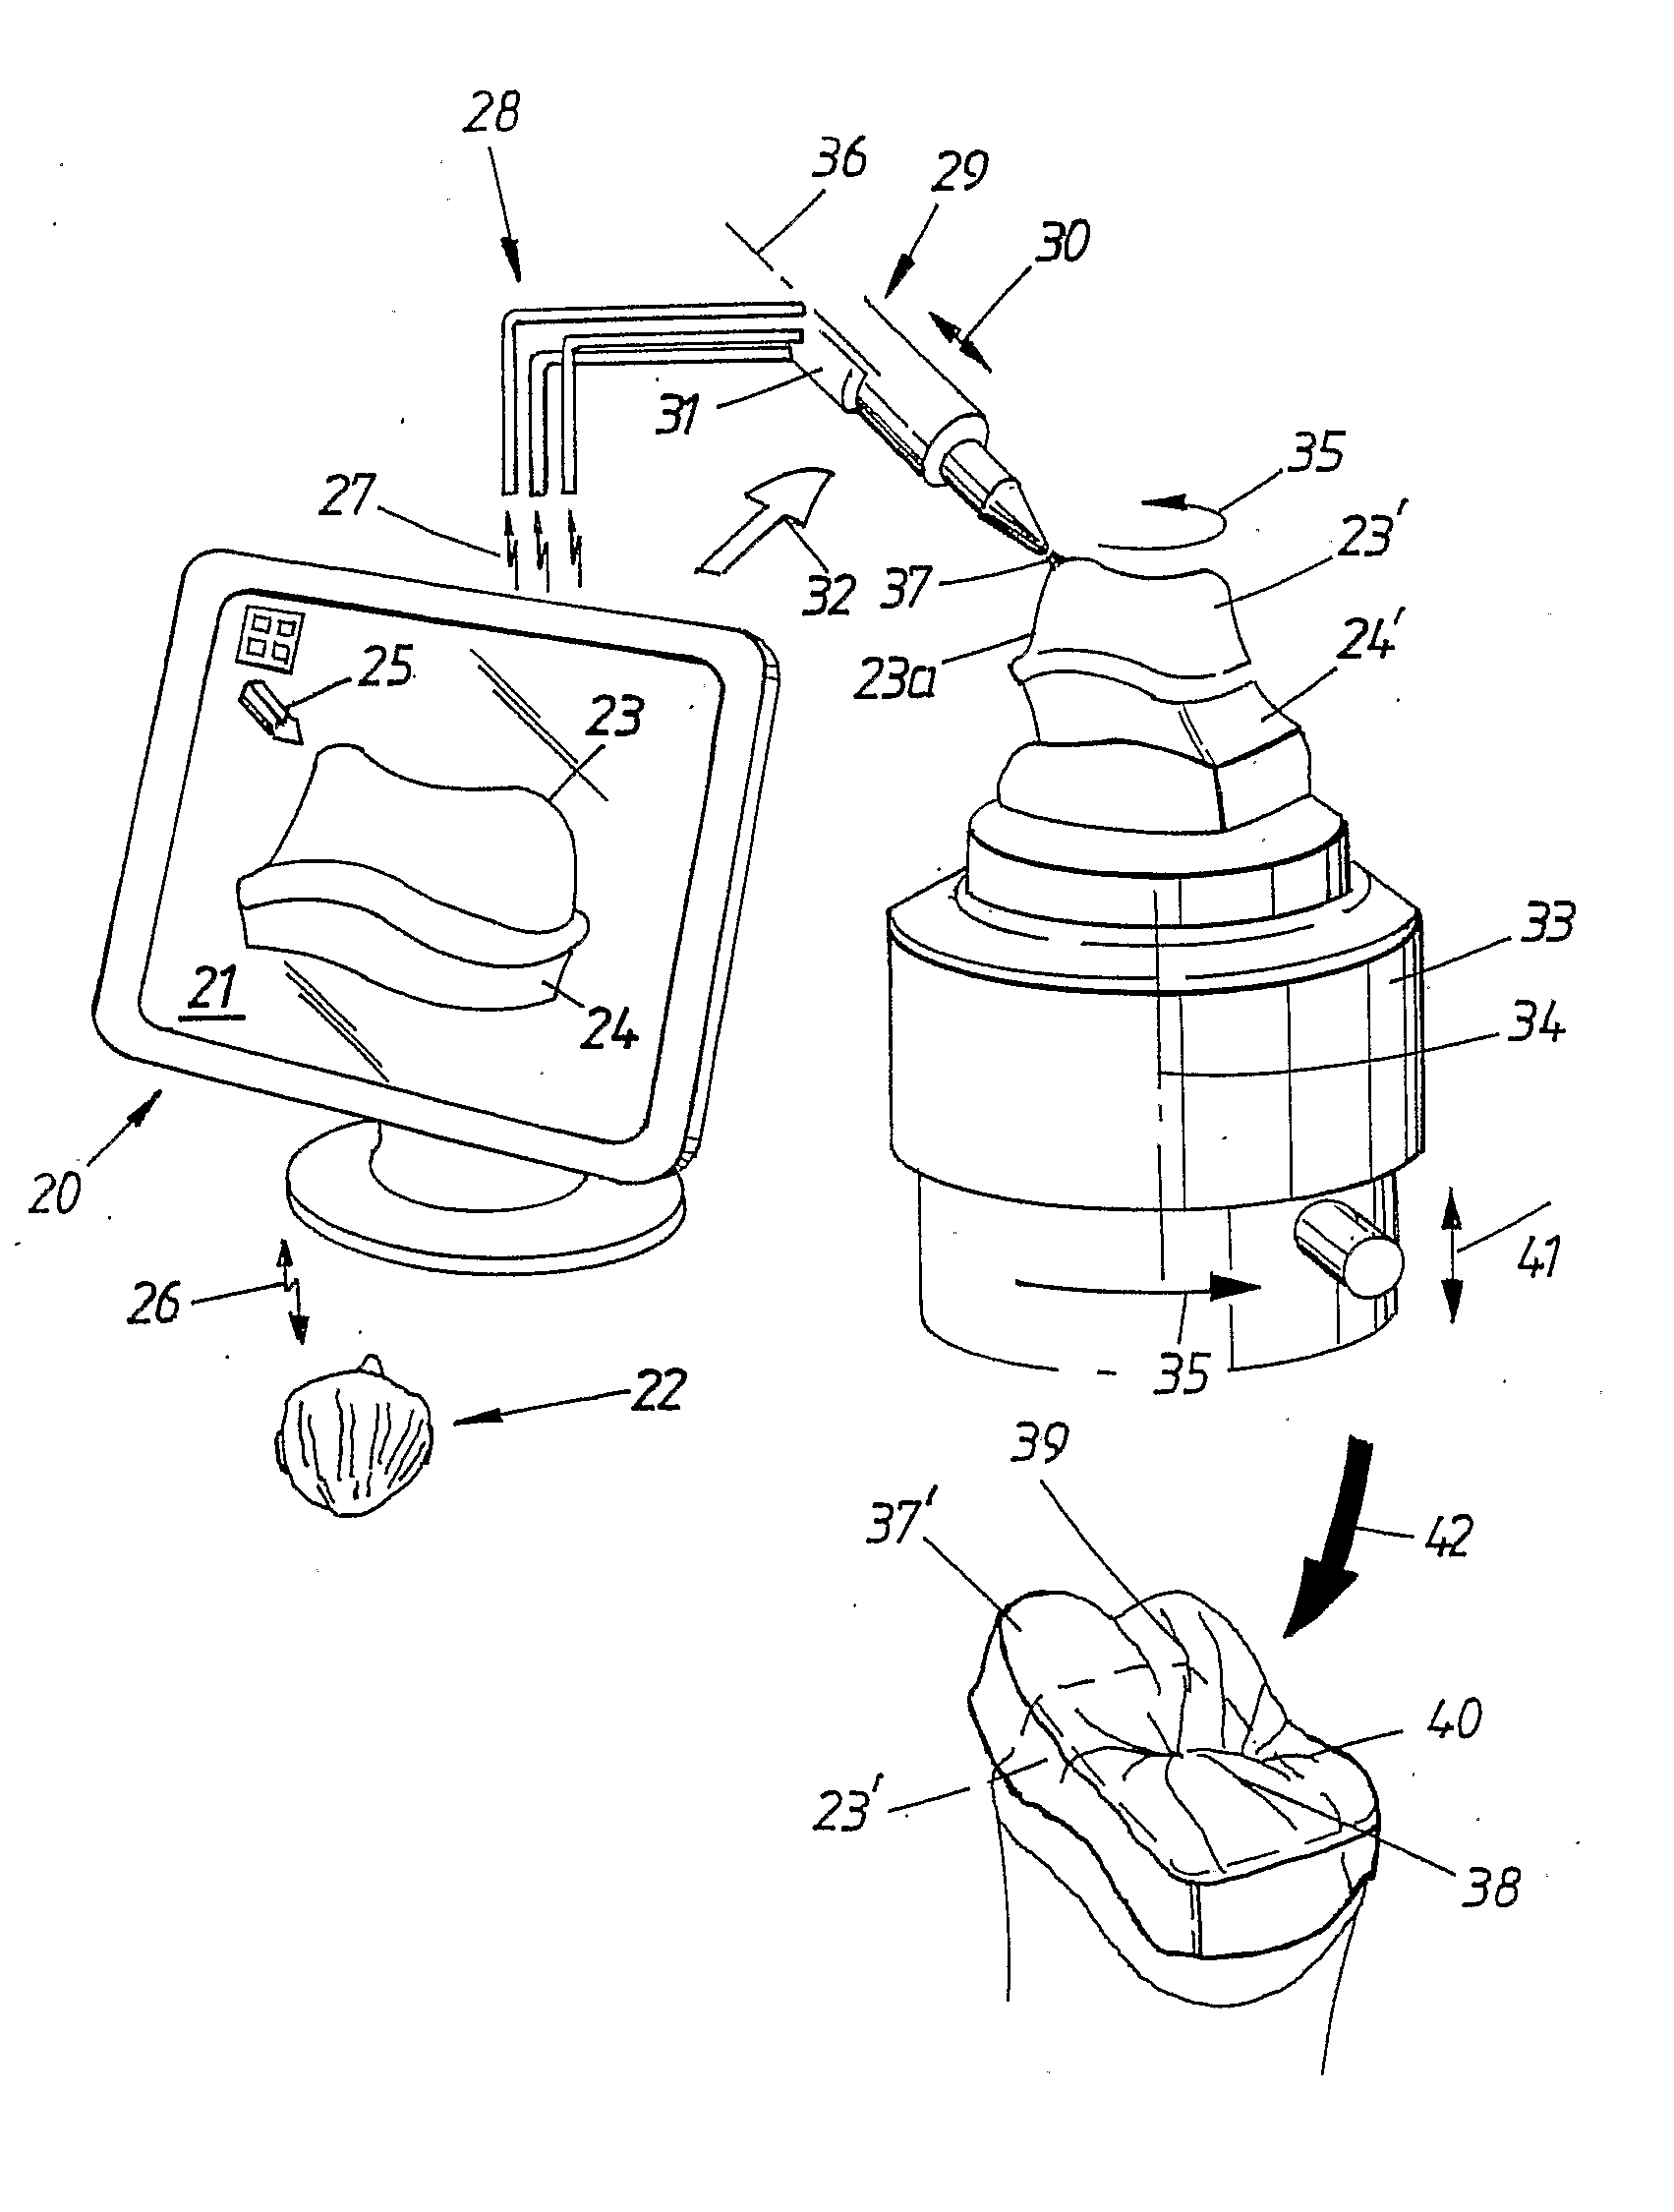 Method and System for Coloring or Tinting a Prosthesis, and Such a Prosthesis